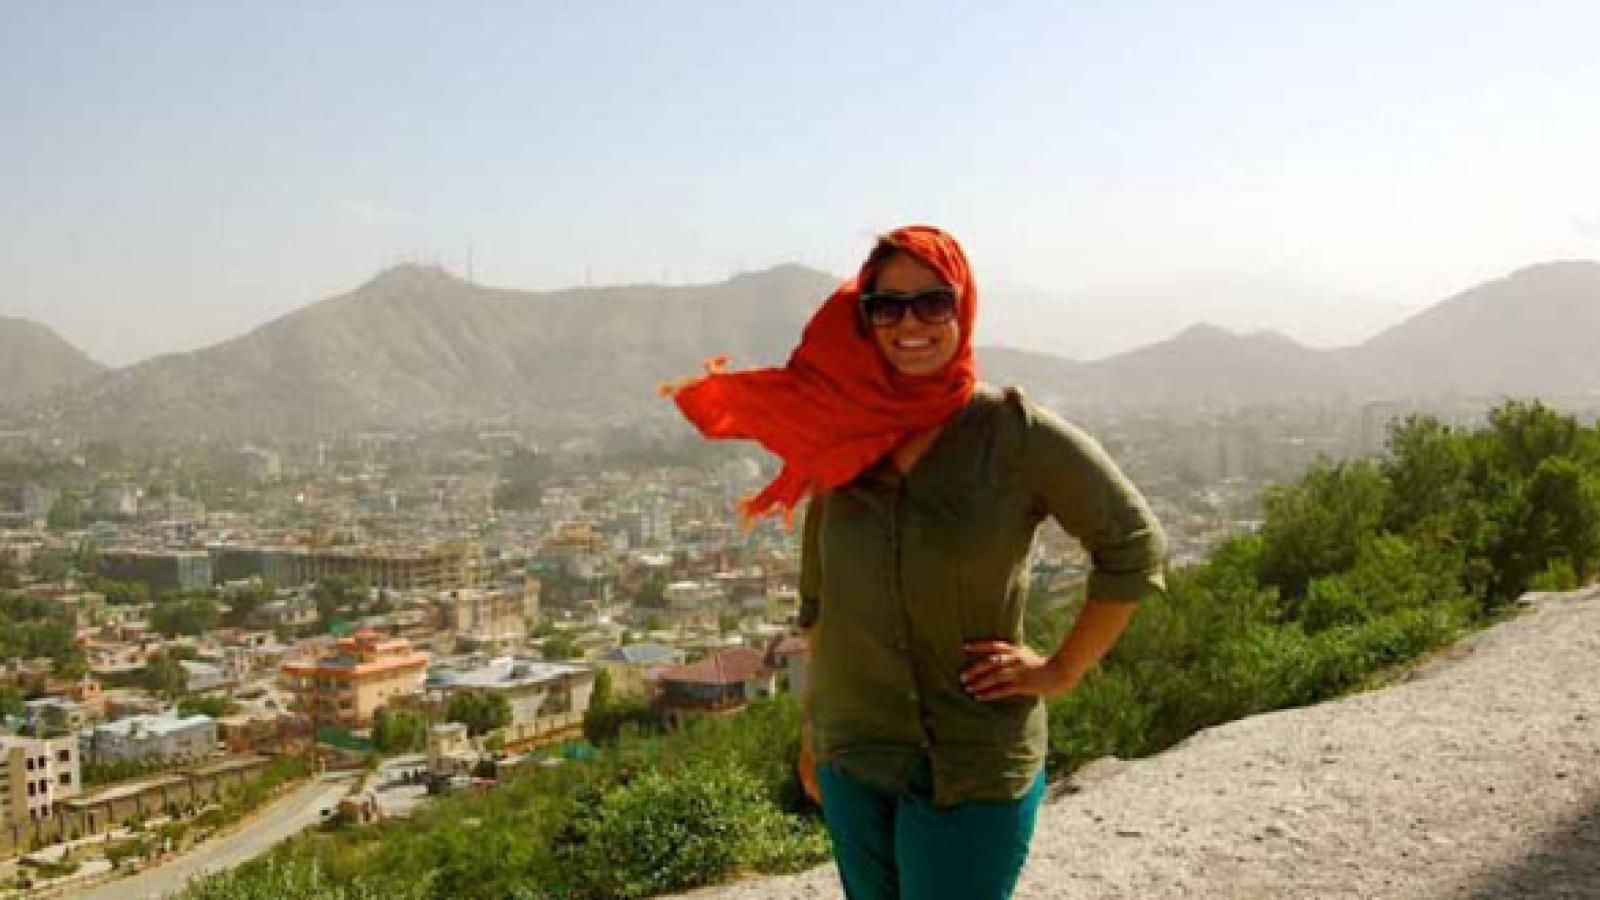 Meredith Leal on a cliff overlooking an Afghan town.